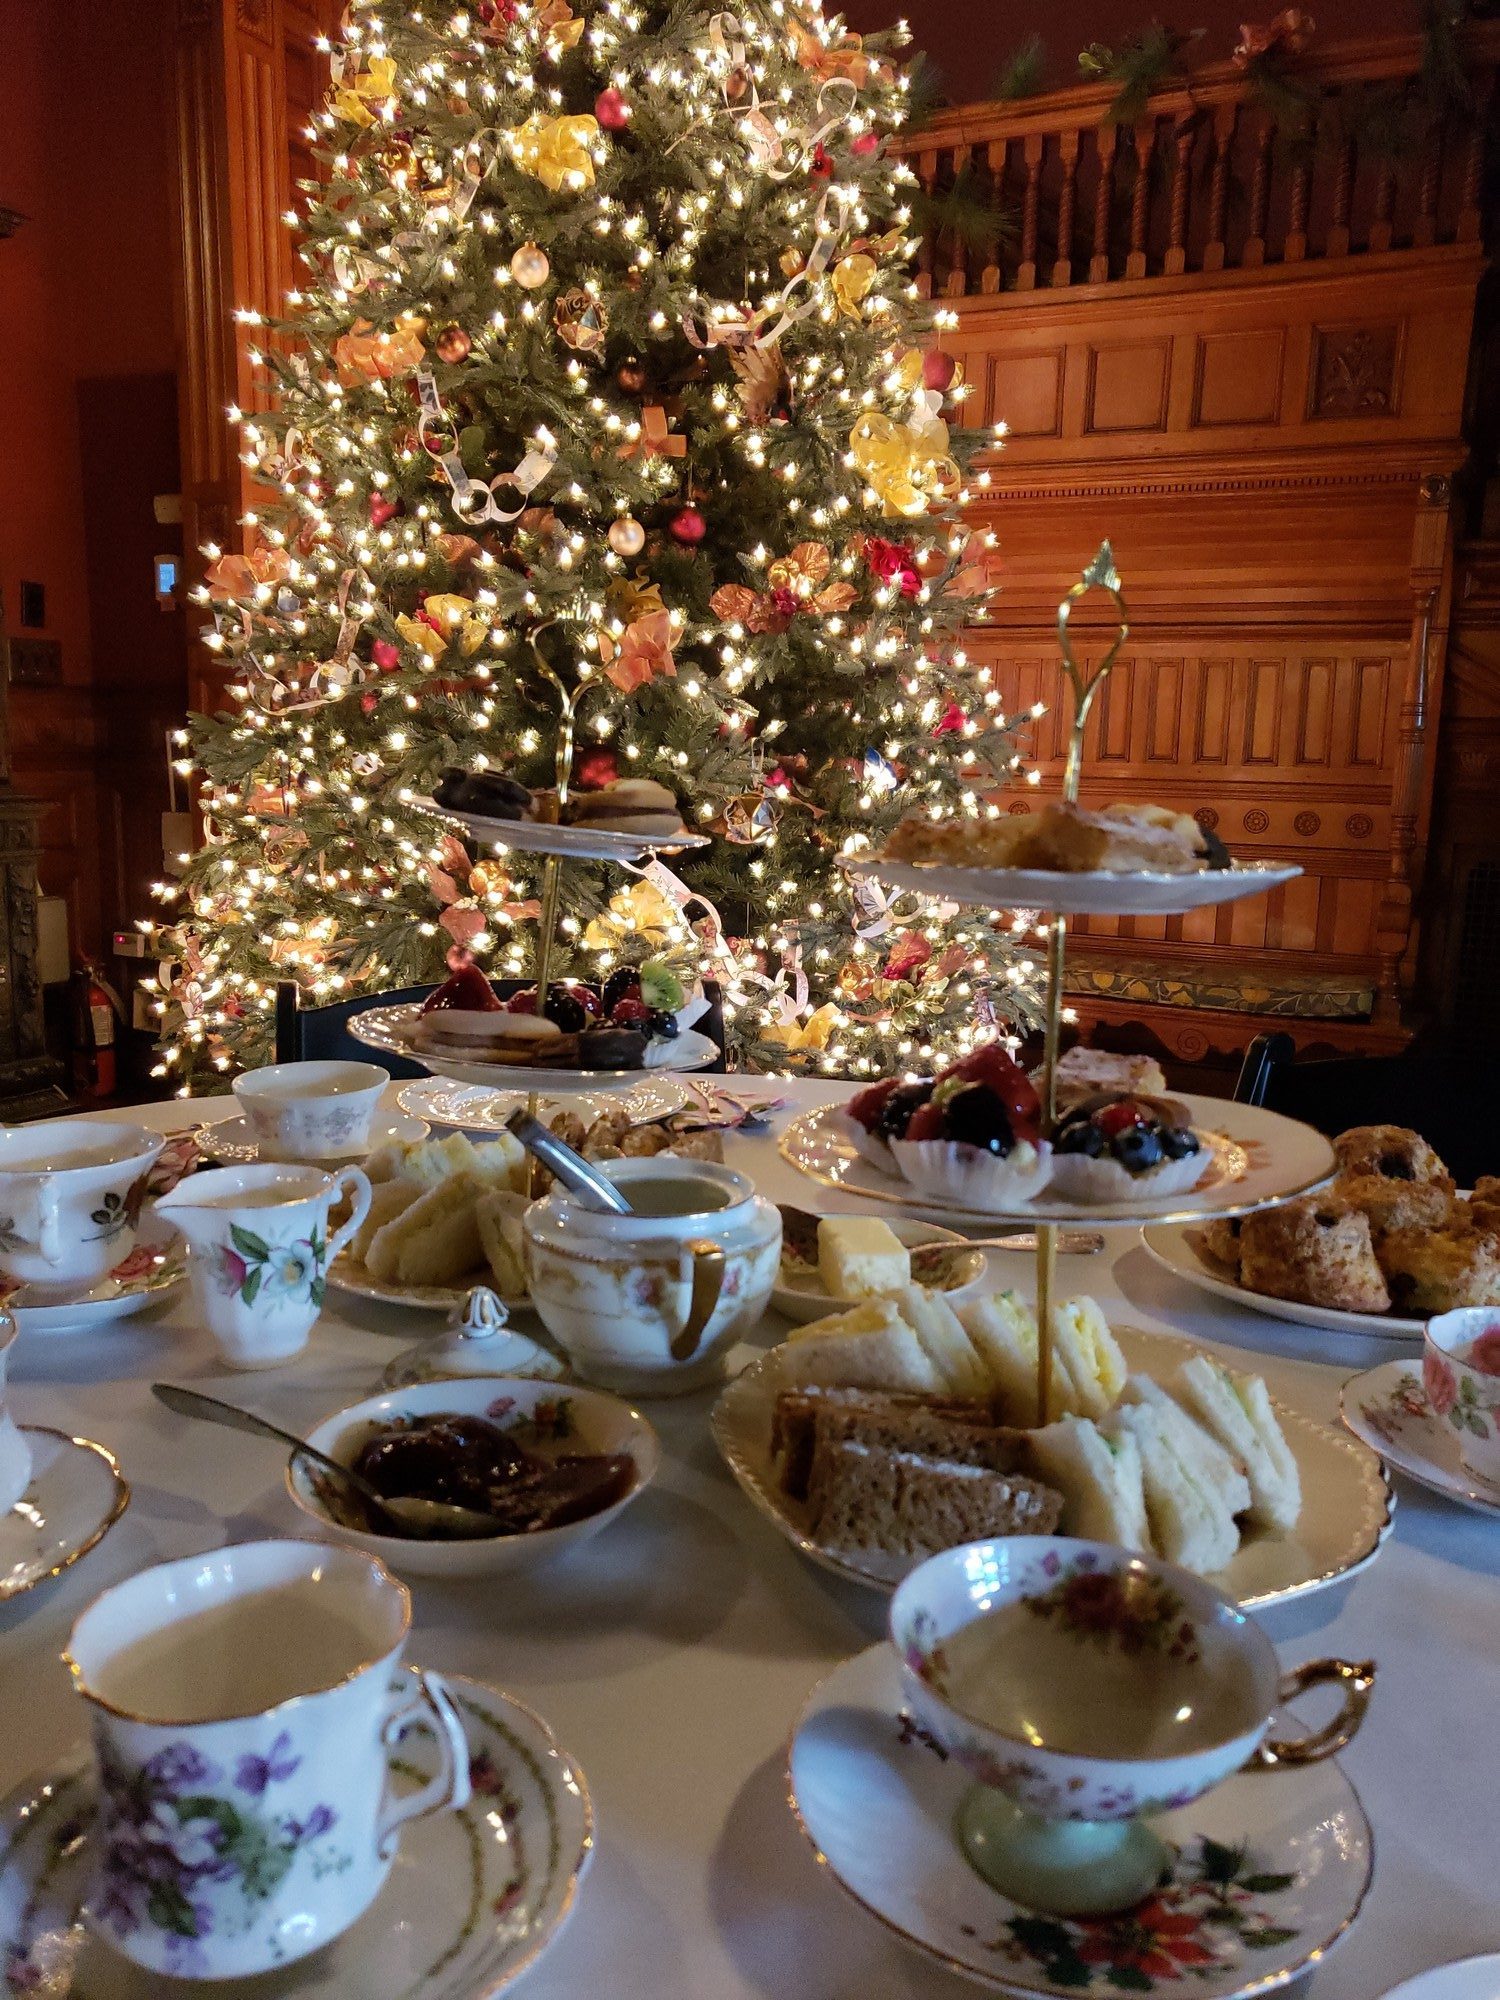 A table with teacups, finger sandwiches, and desserts with a Christmas tree in the background.